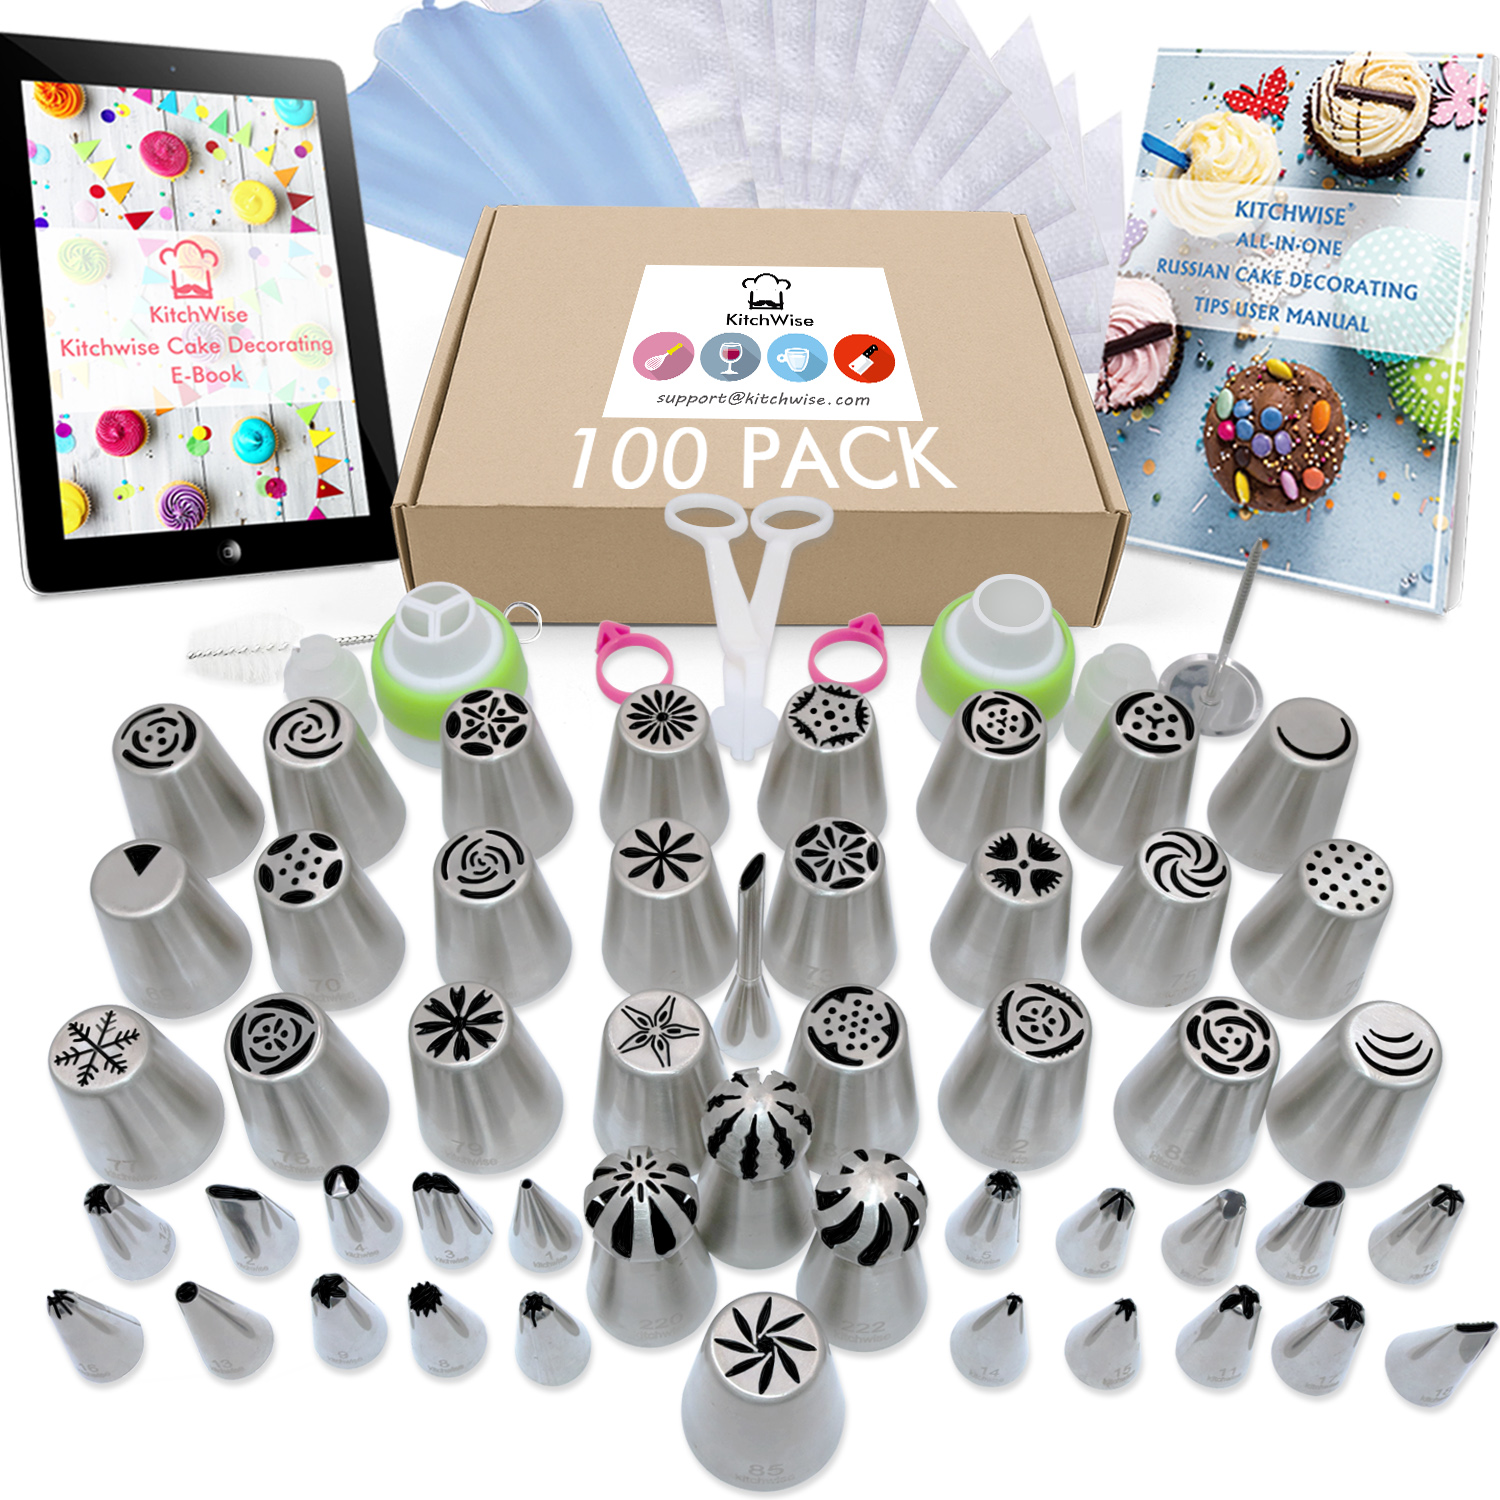 Kitchwise Russian Piping Tips - 100 Piece Cake Decorating ...